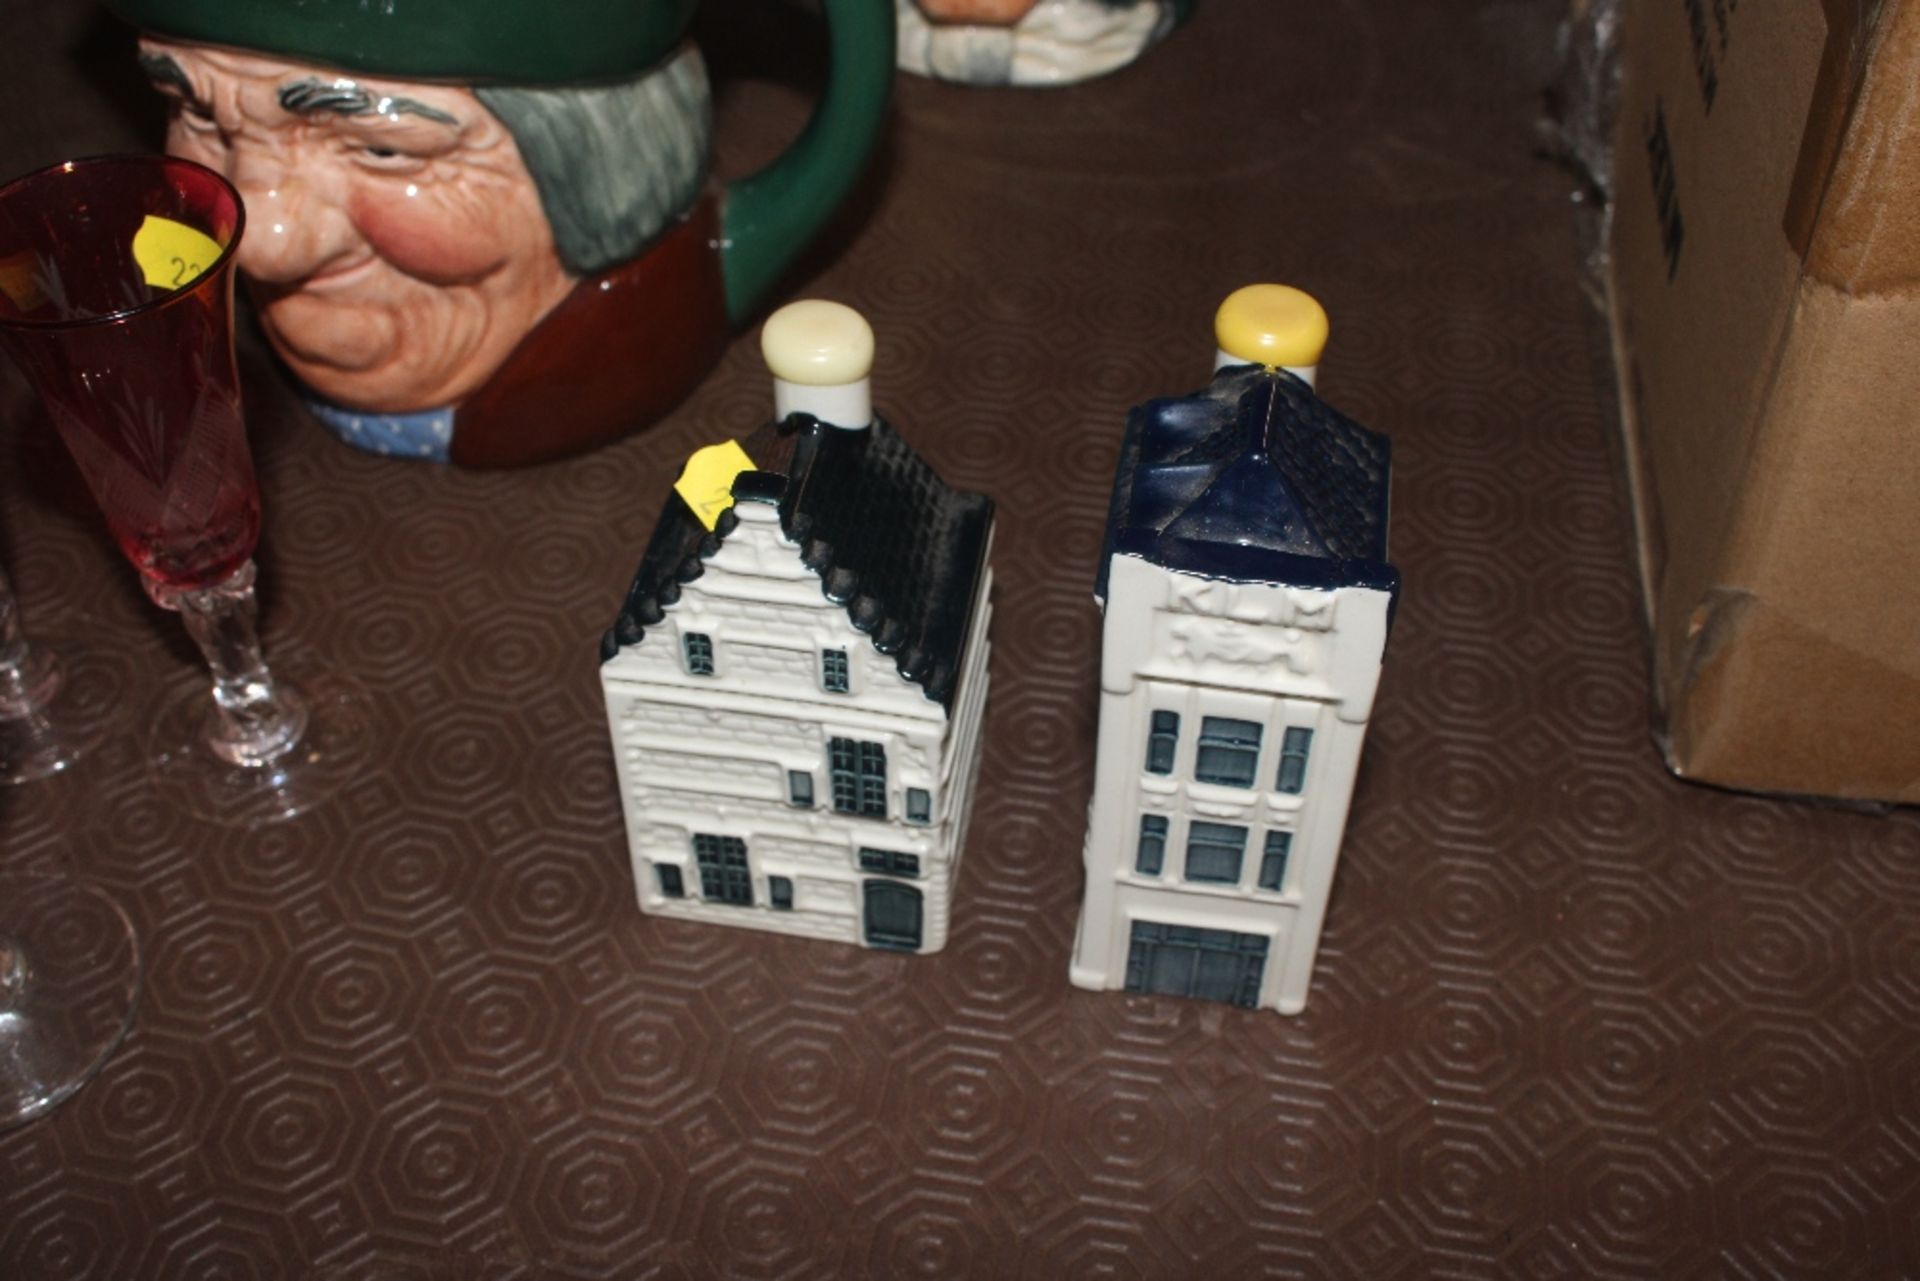 Six KLM Delft houses - Image 3 of 5